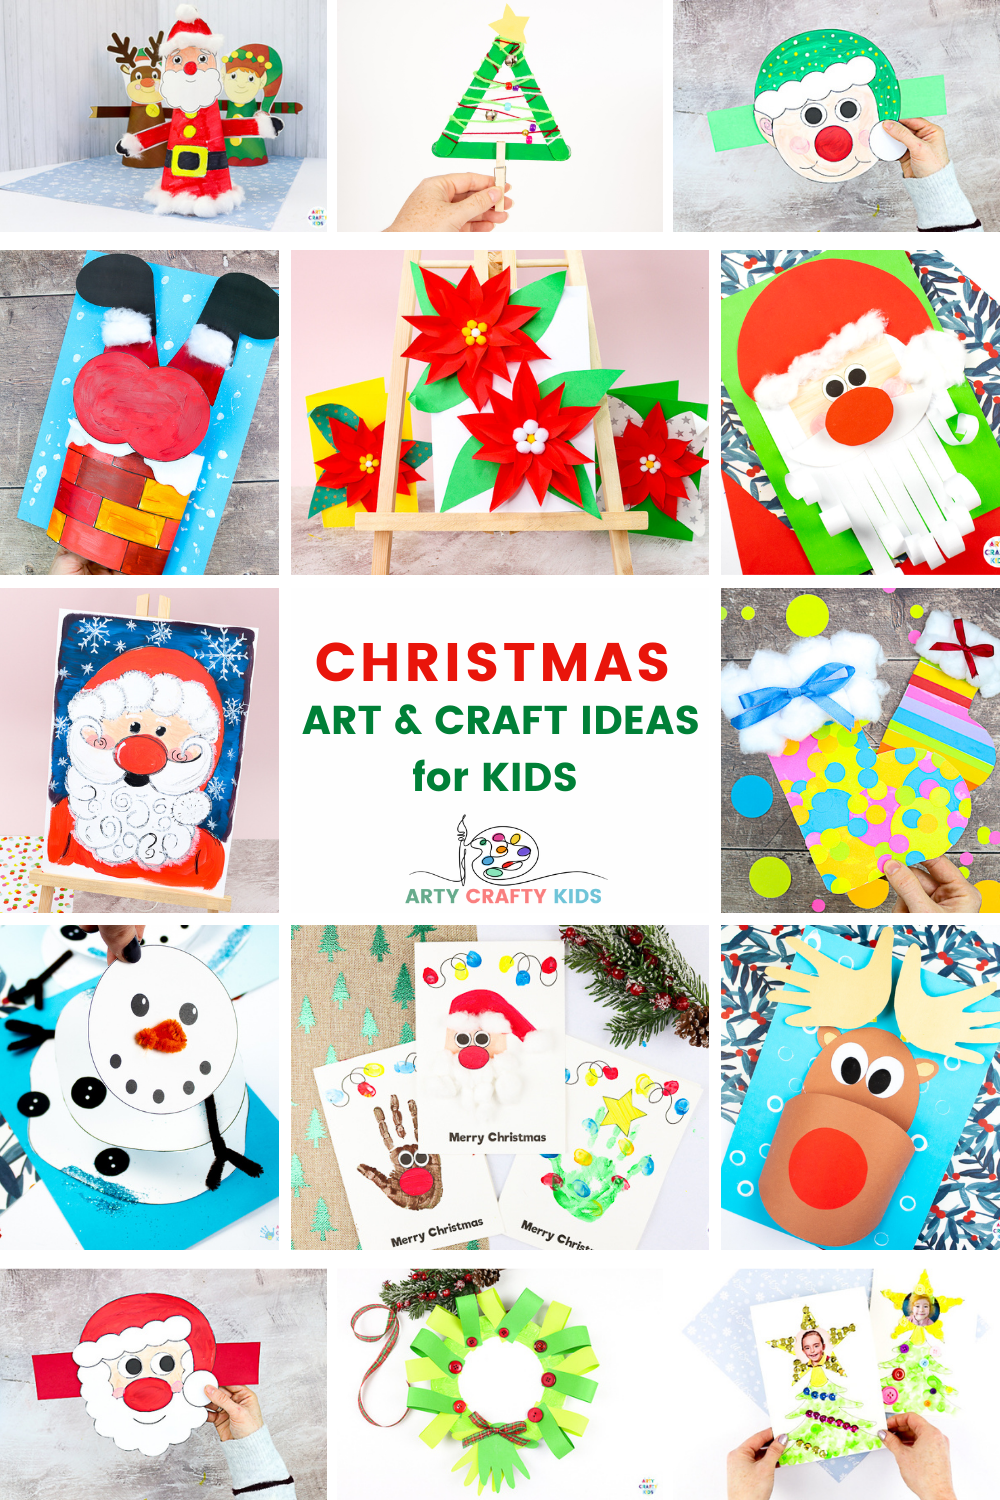 5 Benefits of Arts & Crafts for Seniors, Crafts For Seniors